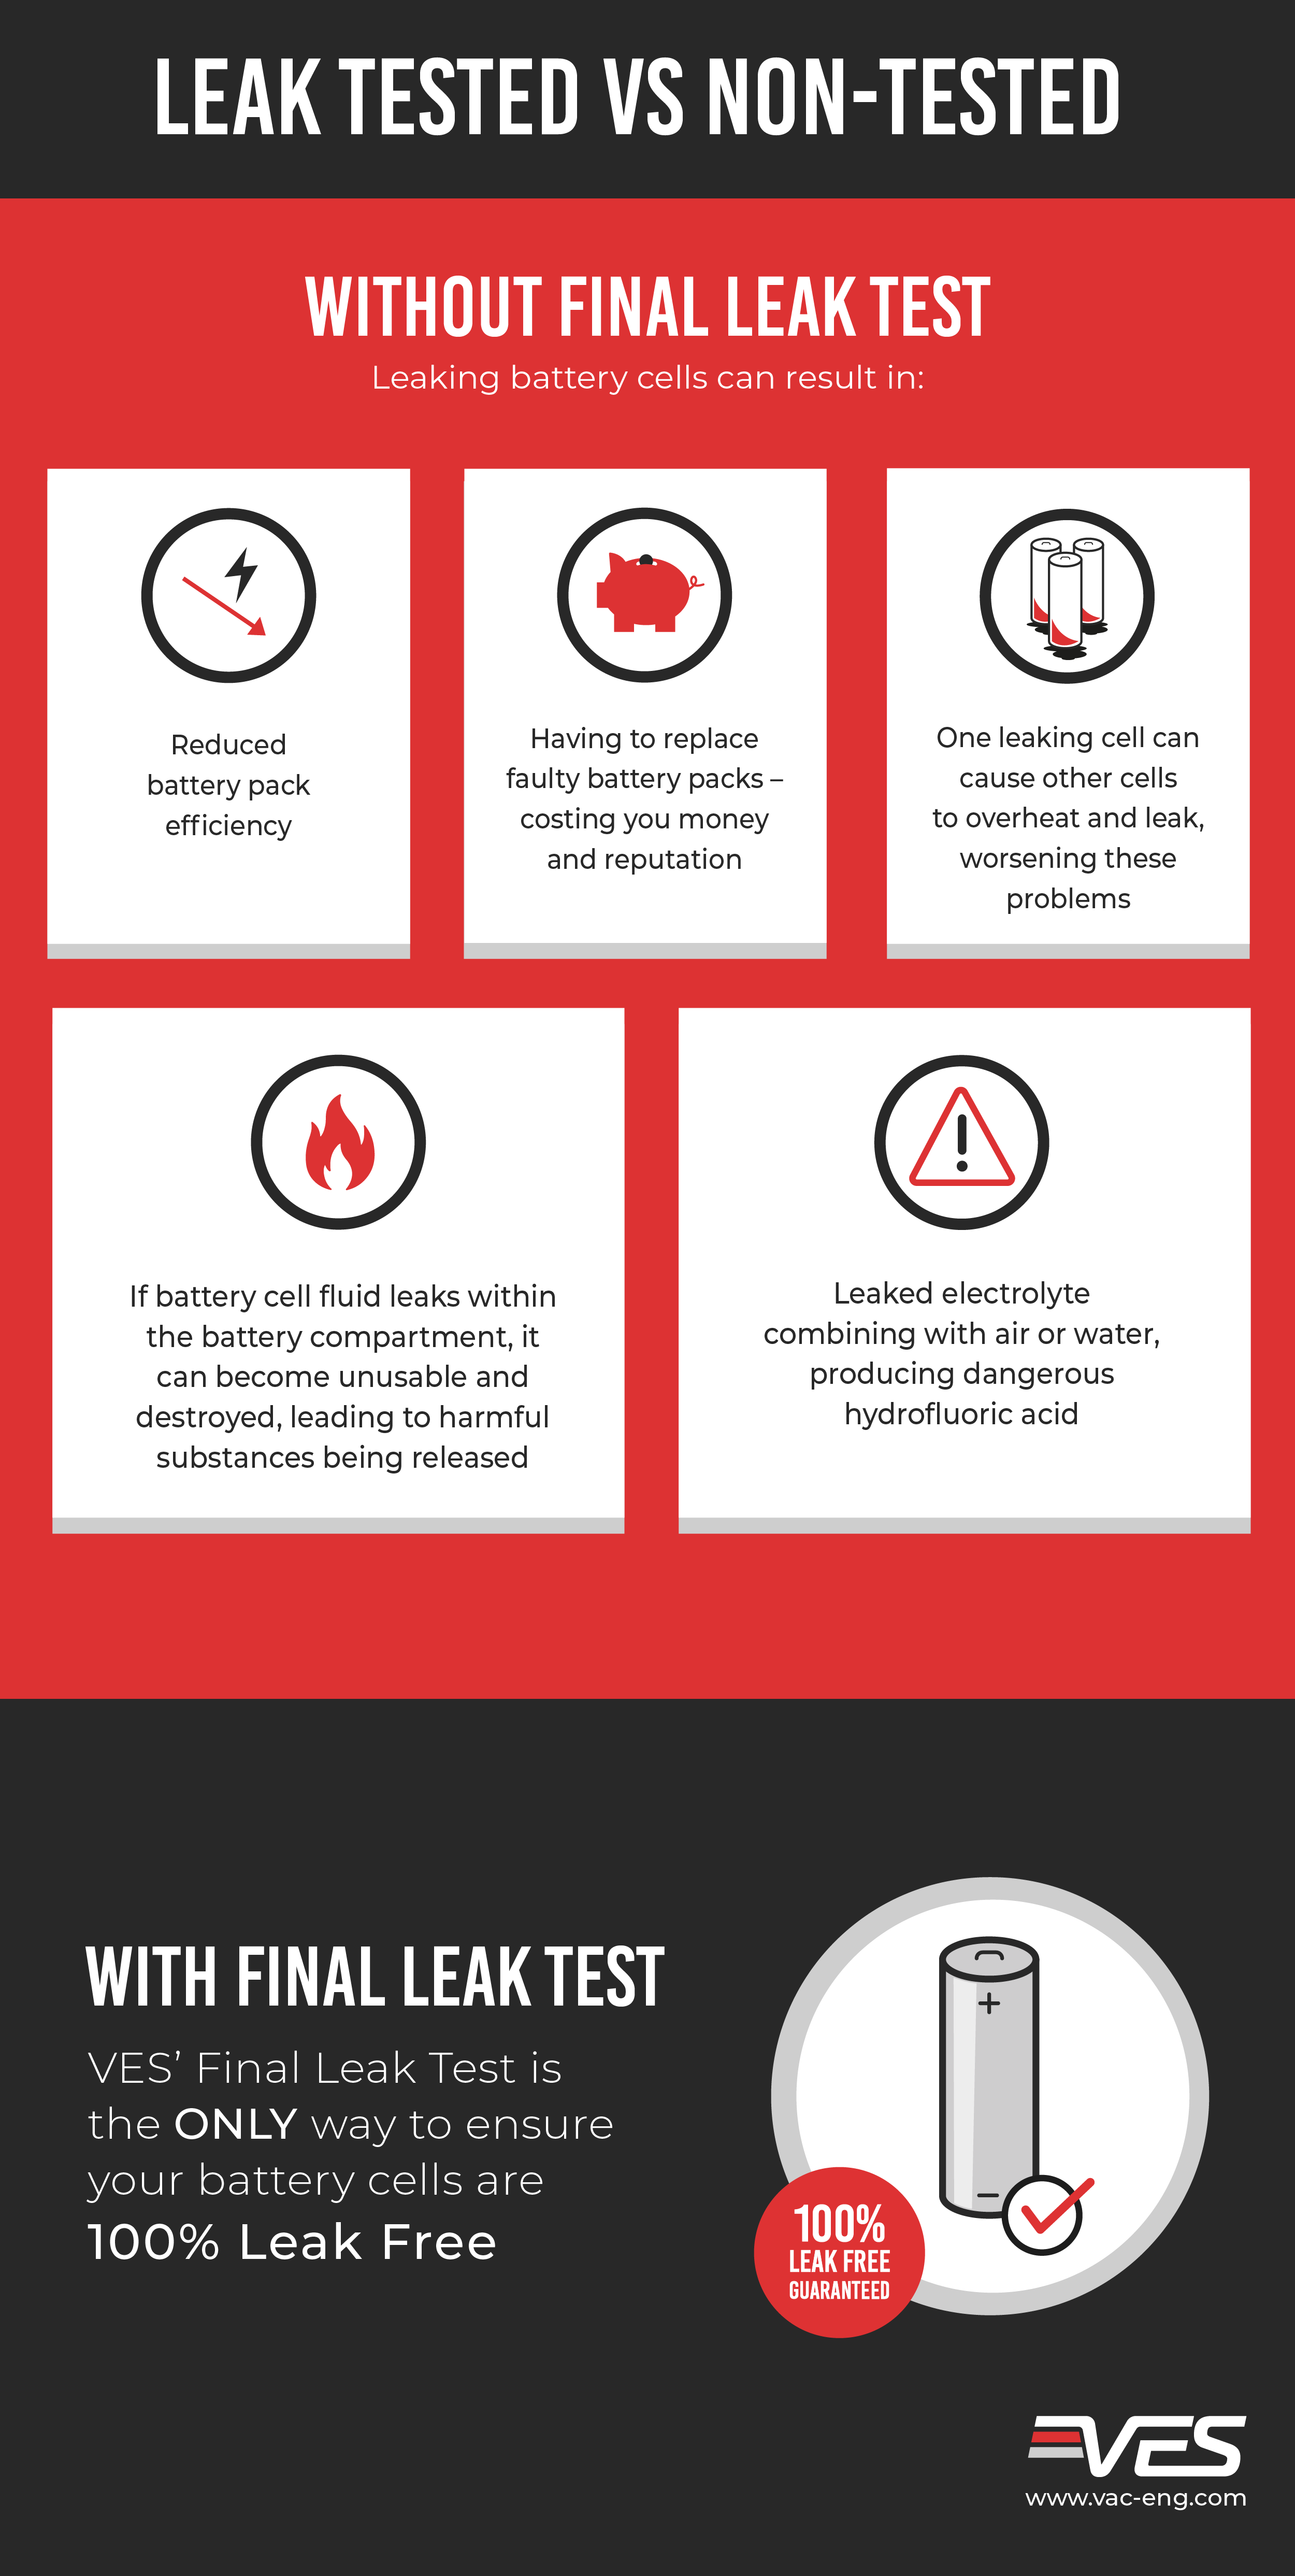 Battery cell leak detection versus non-tested battery cells. Infographic describing the issues caused by failure to perform final leak testing of batteries in industry.